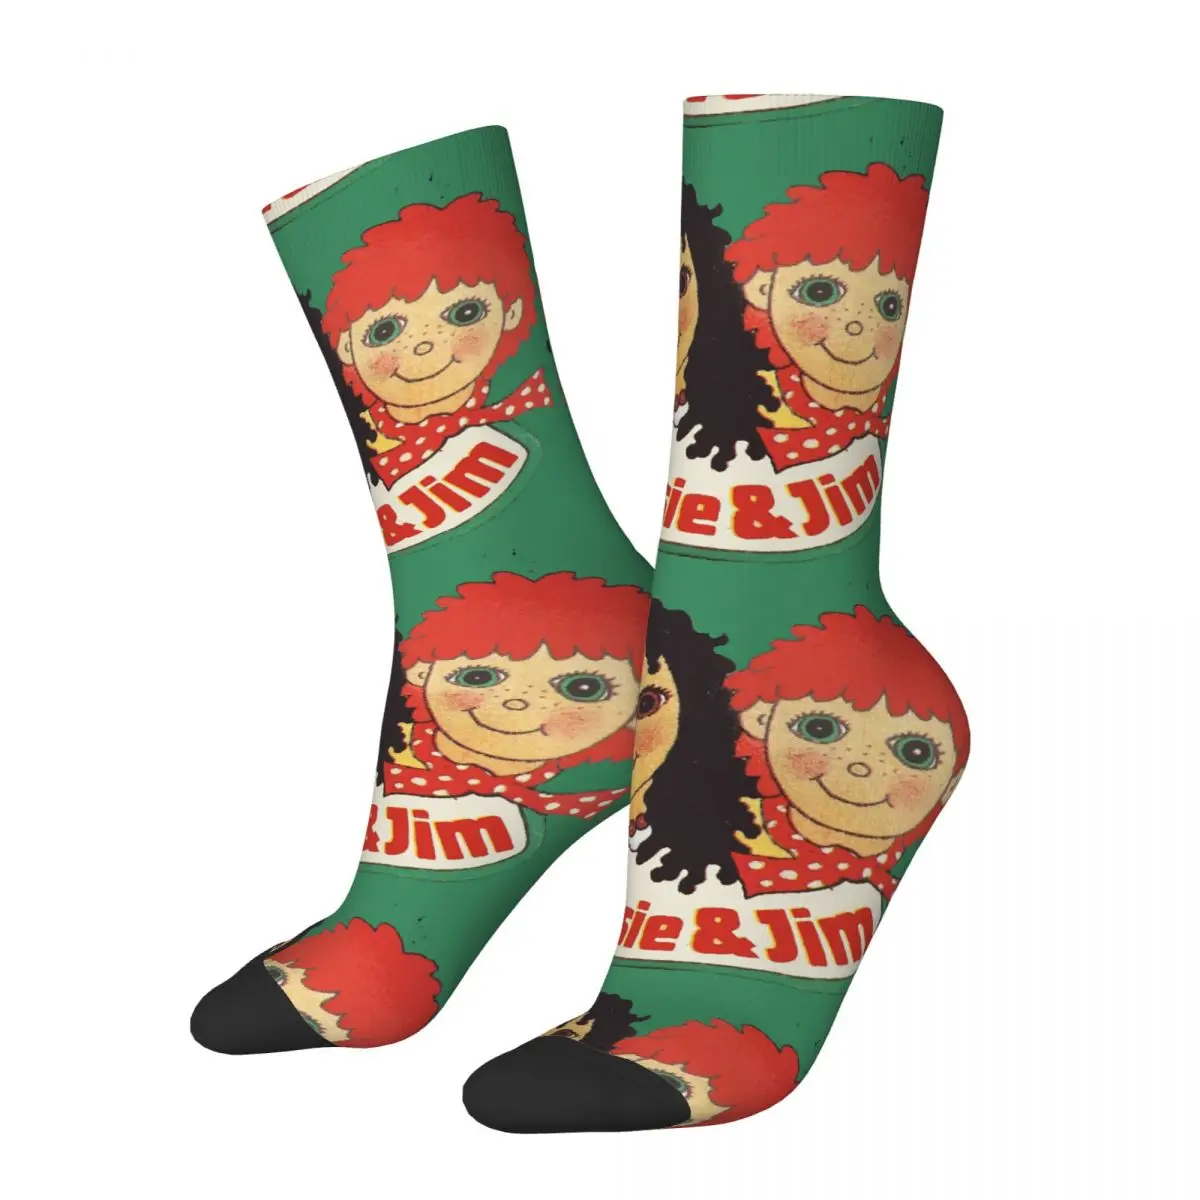 

Funny Crazy Compression Sock for Men Show Hip Hop Harajuku Rosie and Jim Kids Childrens TV Happy Pattern Printed Boys Crew Sock